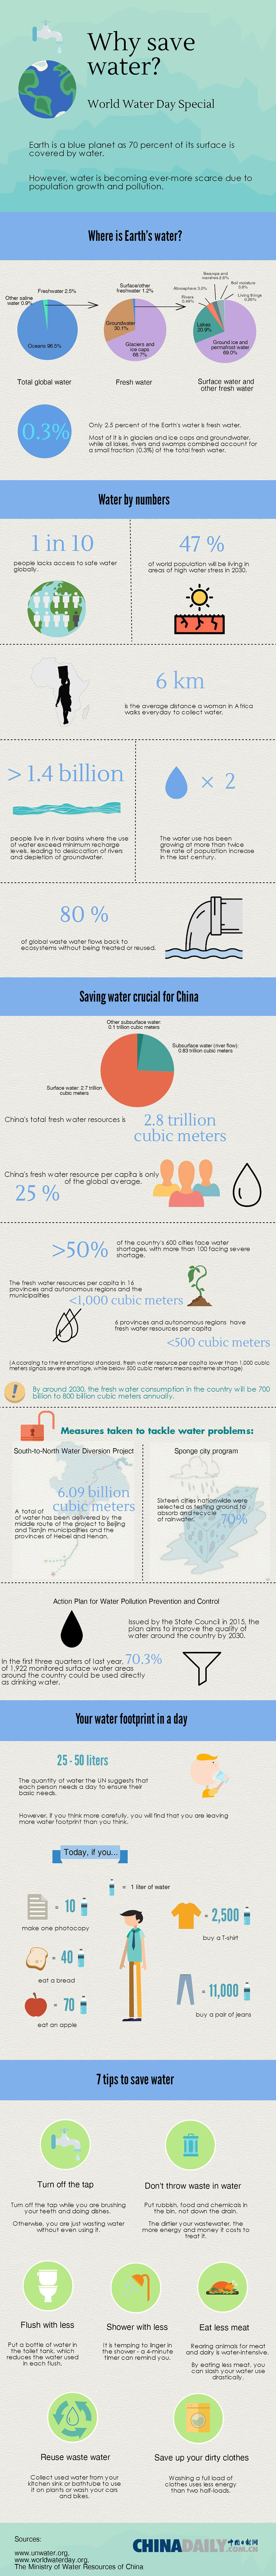 Infographic: Why save water?